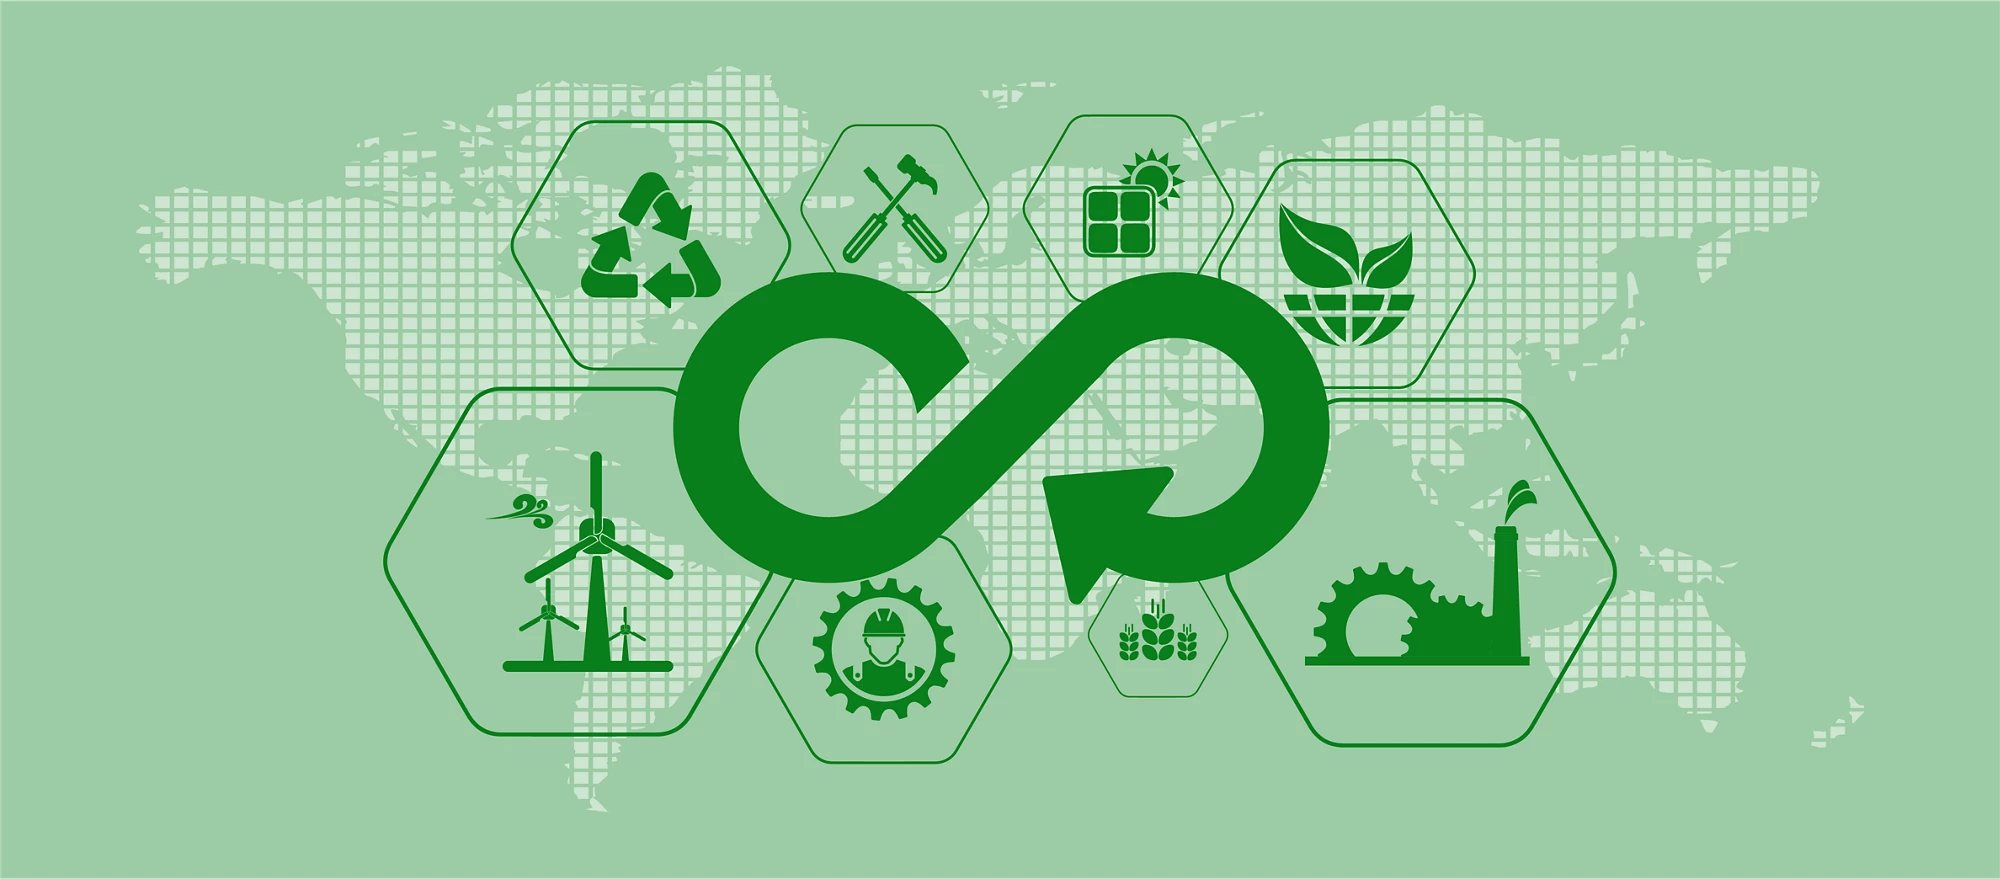 A list of circular economy icons over a world map | © shutterstock.com